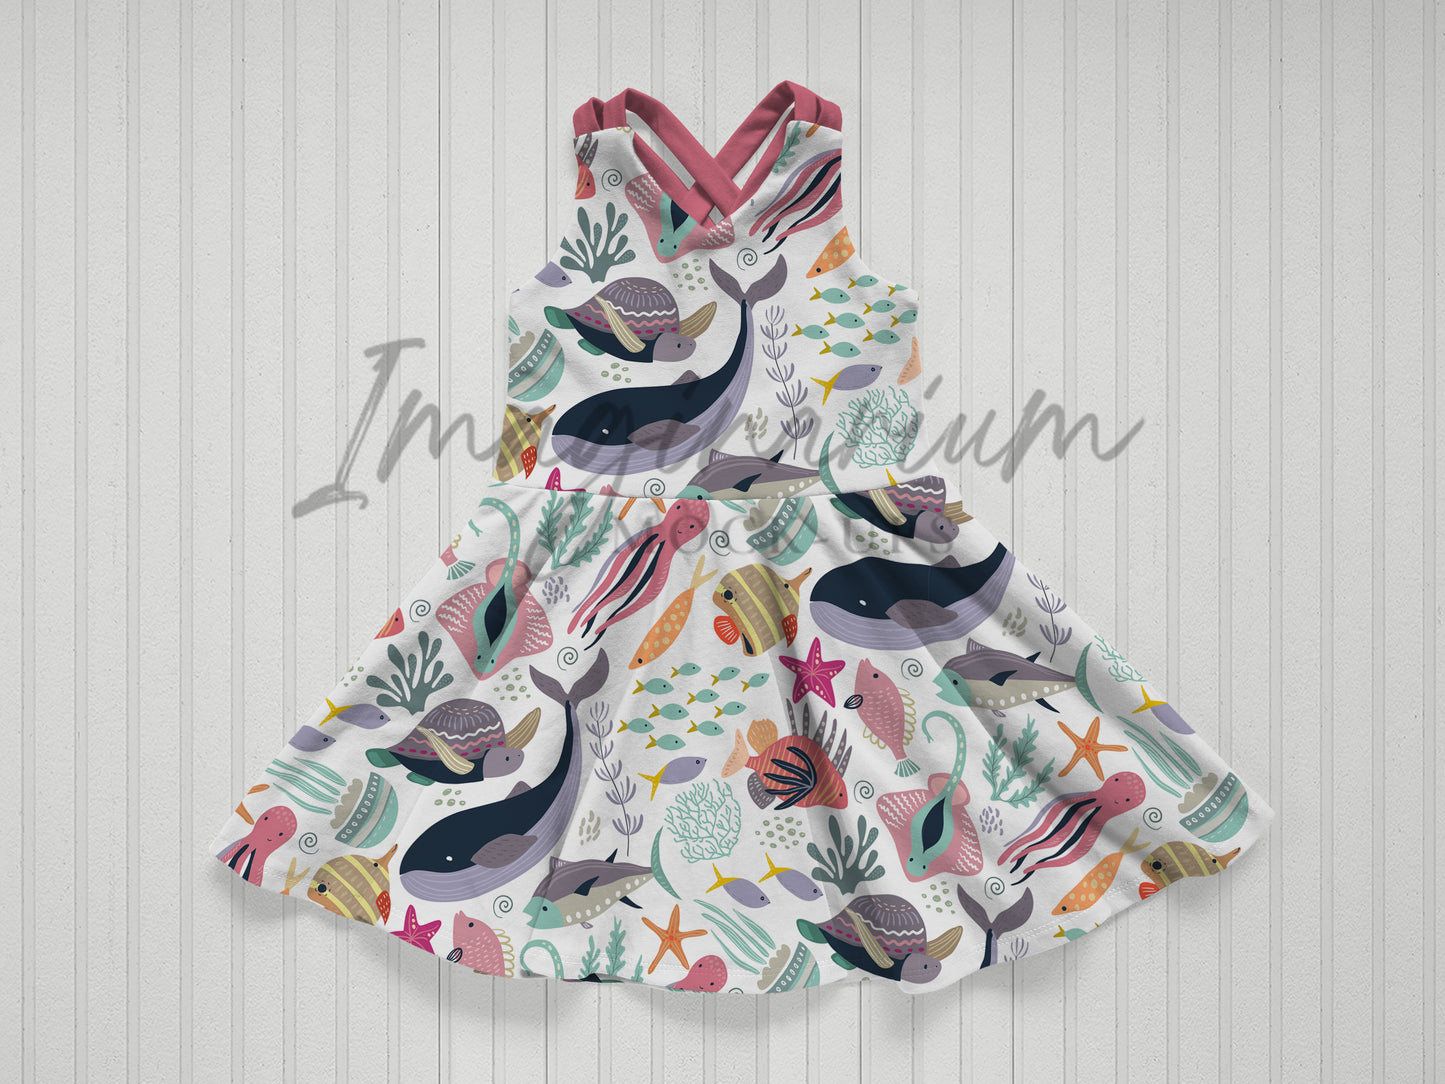 Tigerlily Multi Strap Dress Mock Up, Realistic Clothing Mockup for Photoshop and Procreate